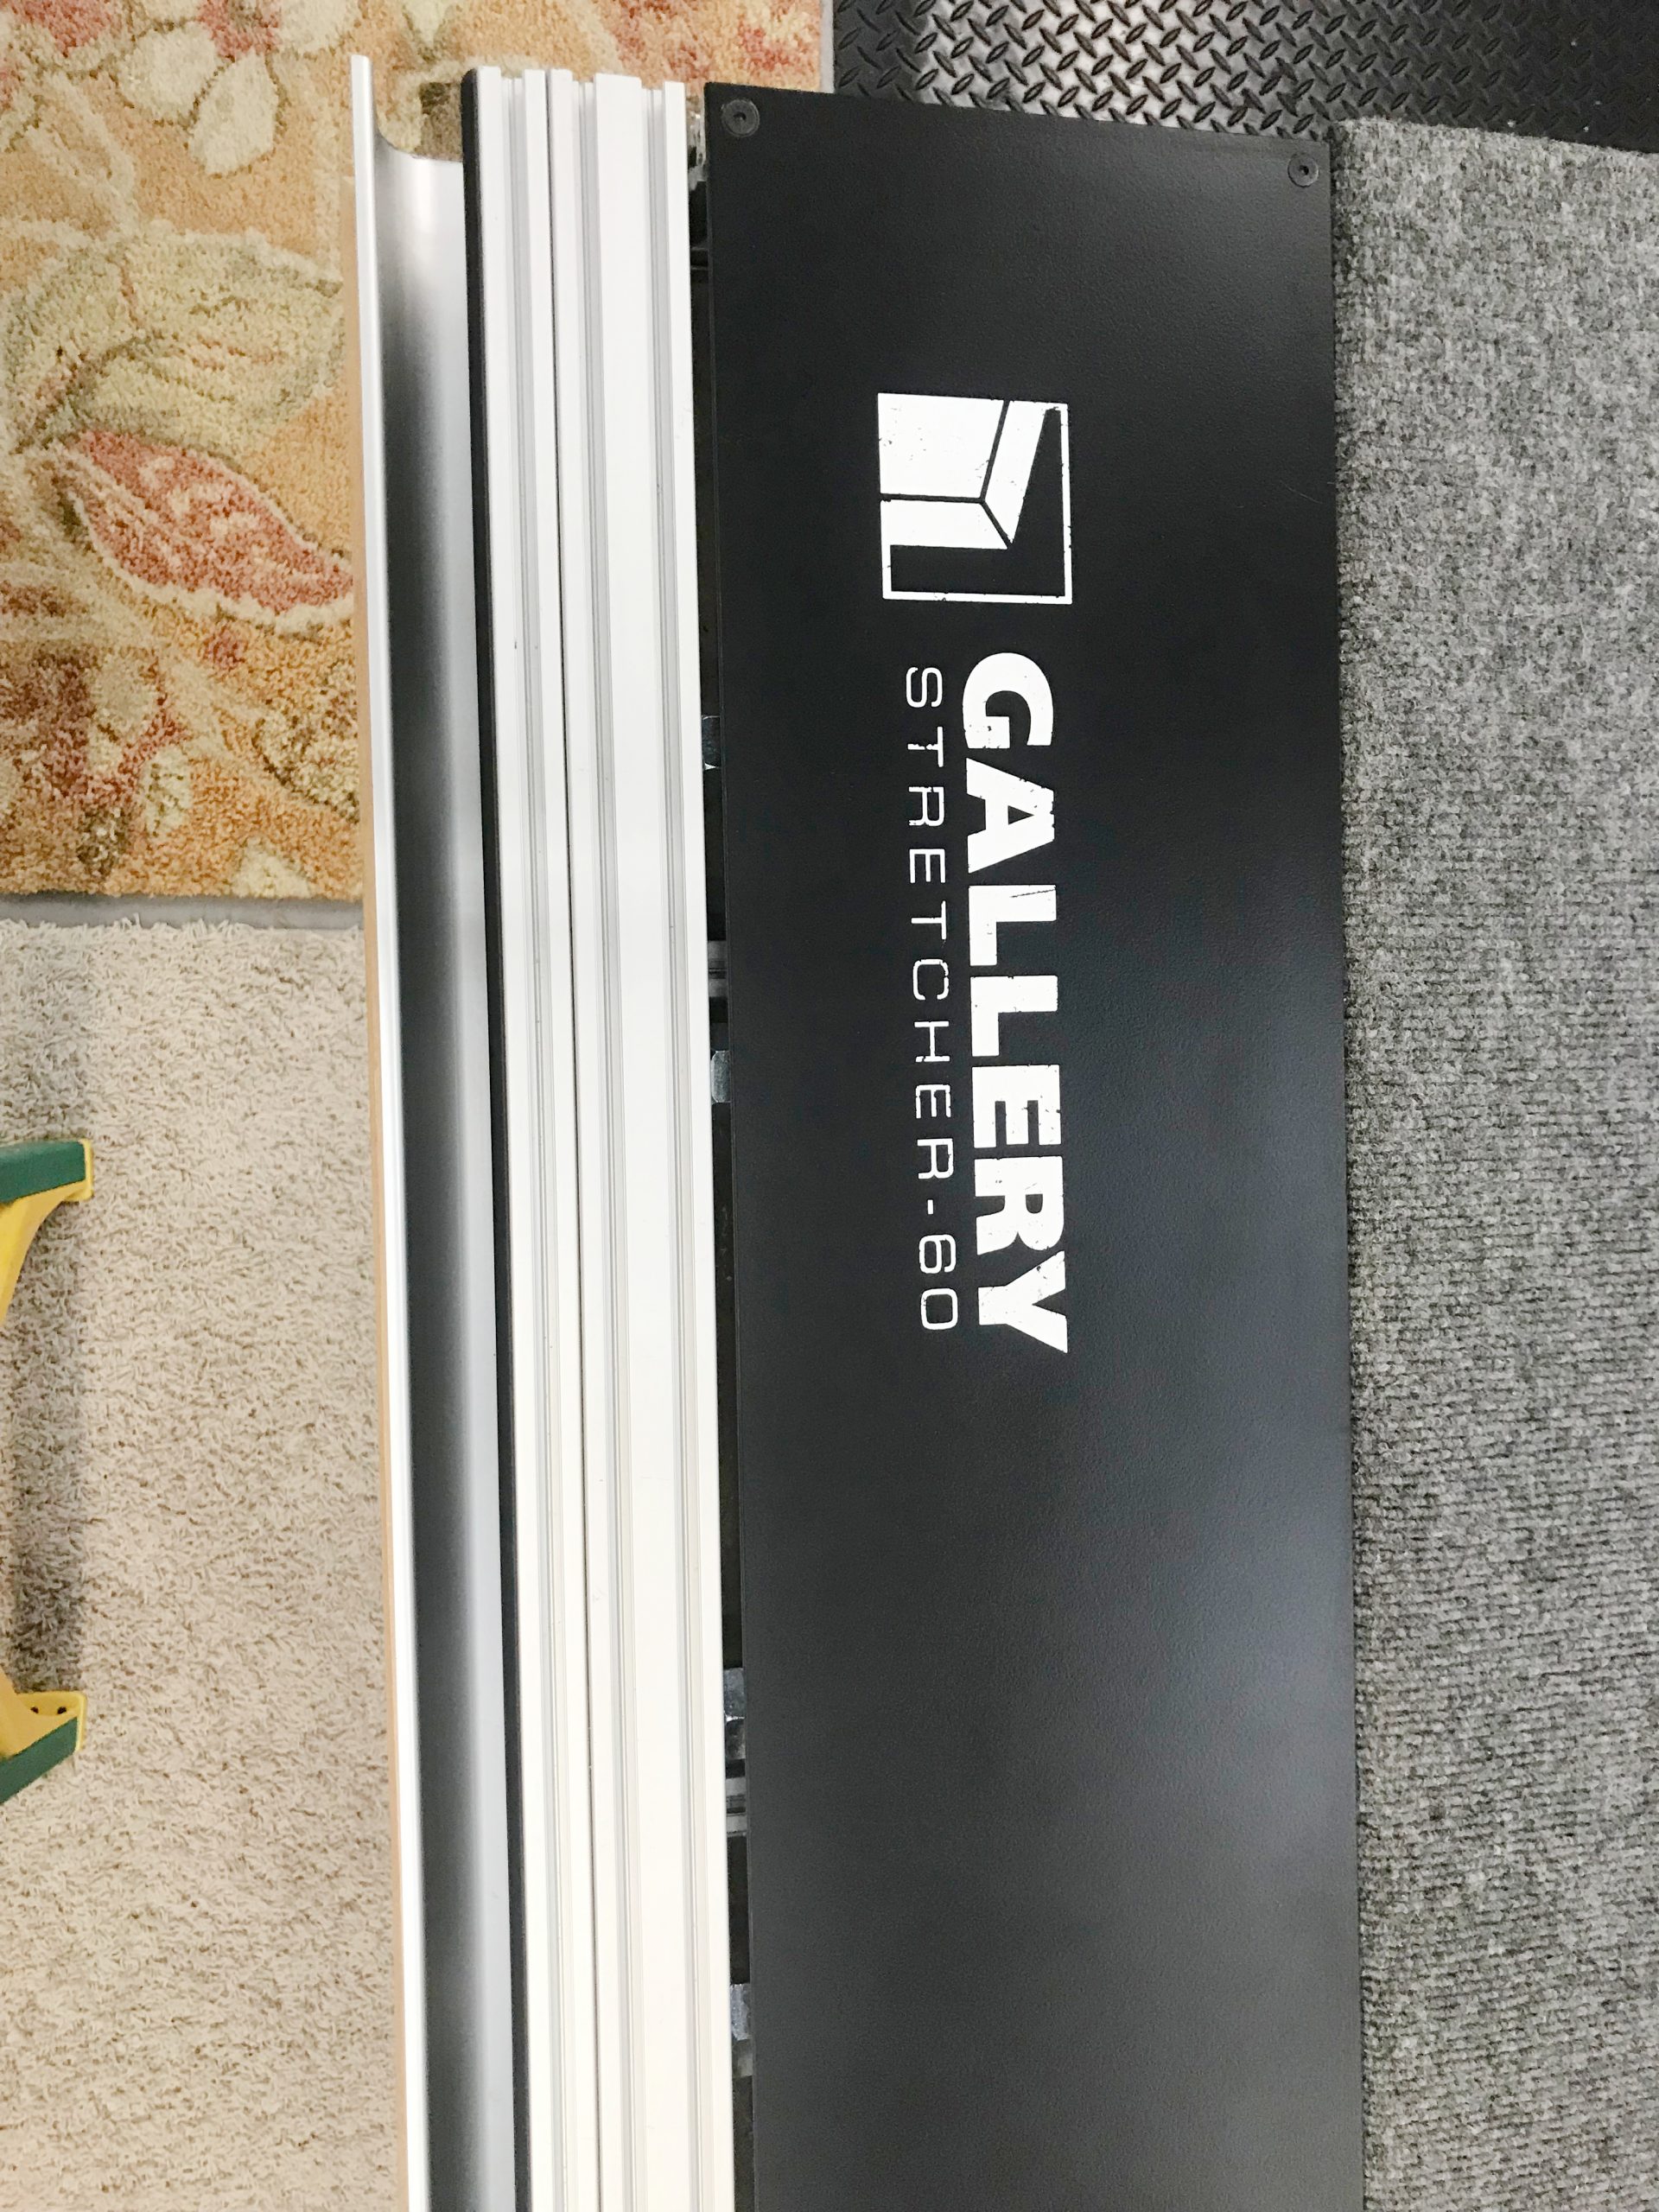 Picture Framing Equipment Lot: Fletcher 3100 Multi Material Cutter, Fletcher 3000 Cutter & Gallery Stretcher 60 (Used) Item # UE-072321A (Maryland)